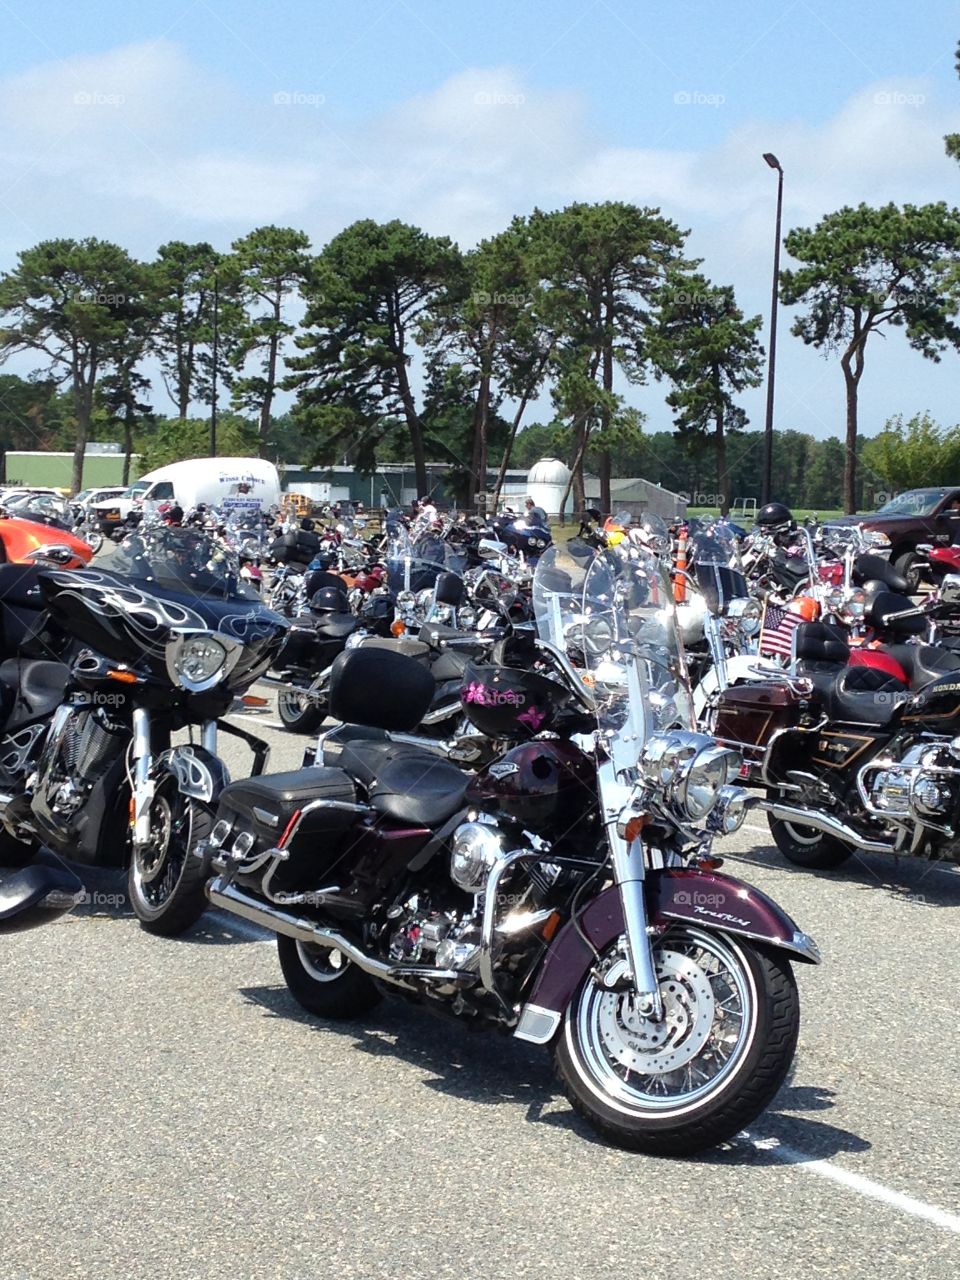 1000 Bike Run Cape Cod. We donated $ and went on a Motorcycle Run to help families of Fallen Heroes. A record 1000 Biked rode. 